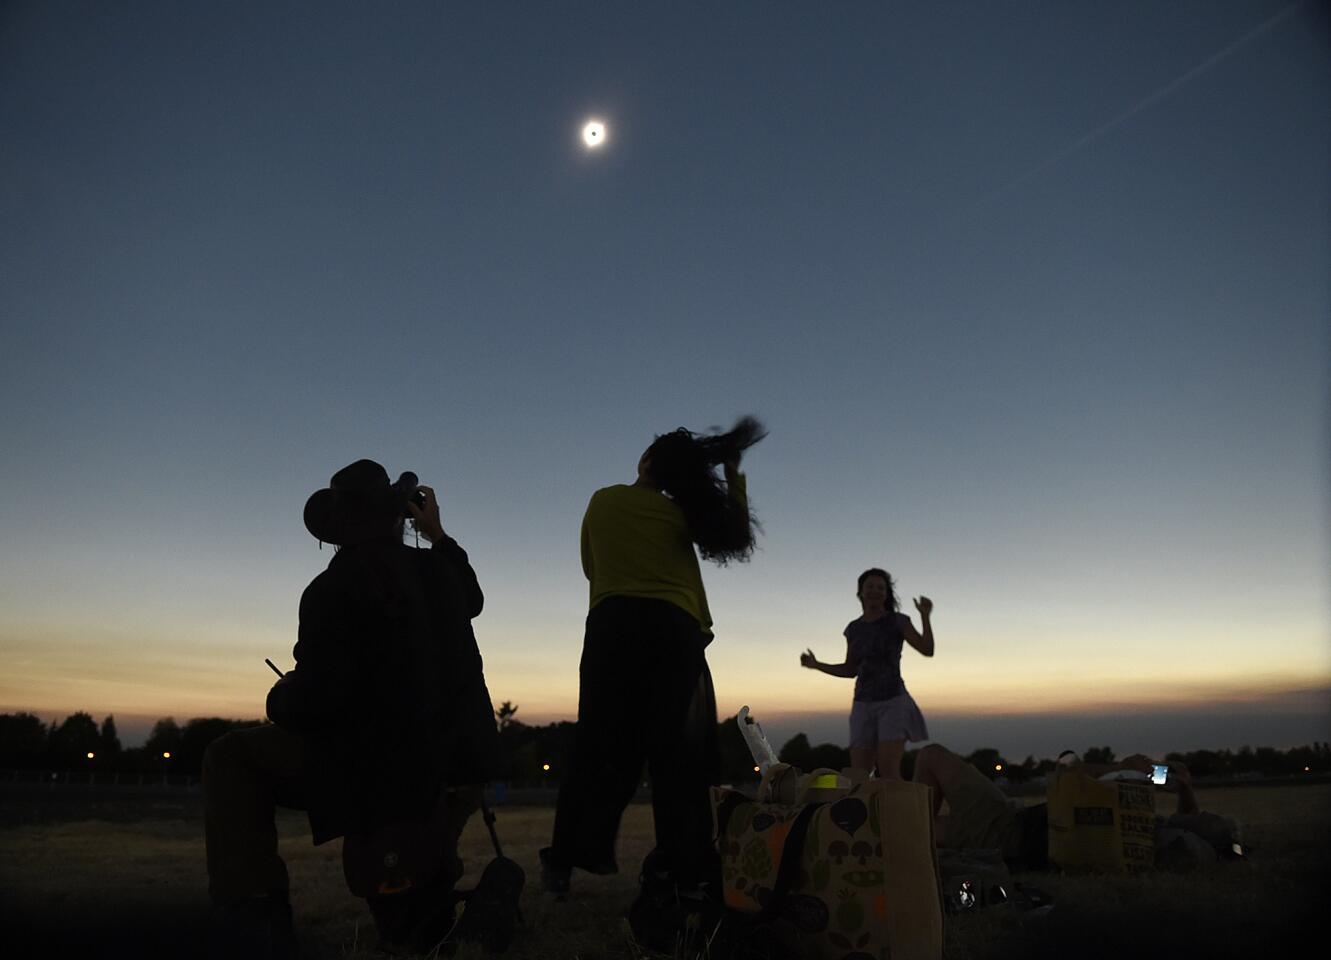 Views of the solar eclipse from across the U.S.